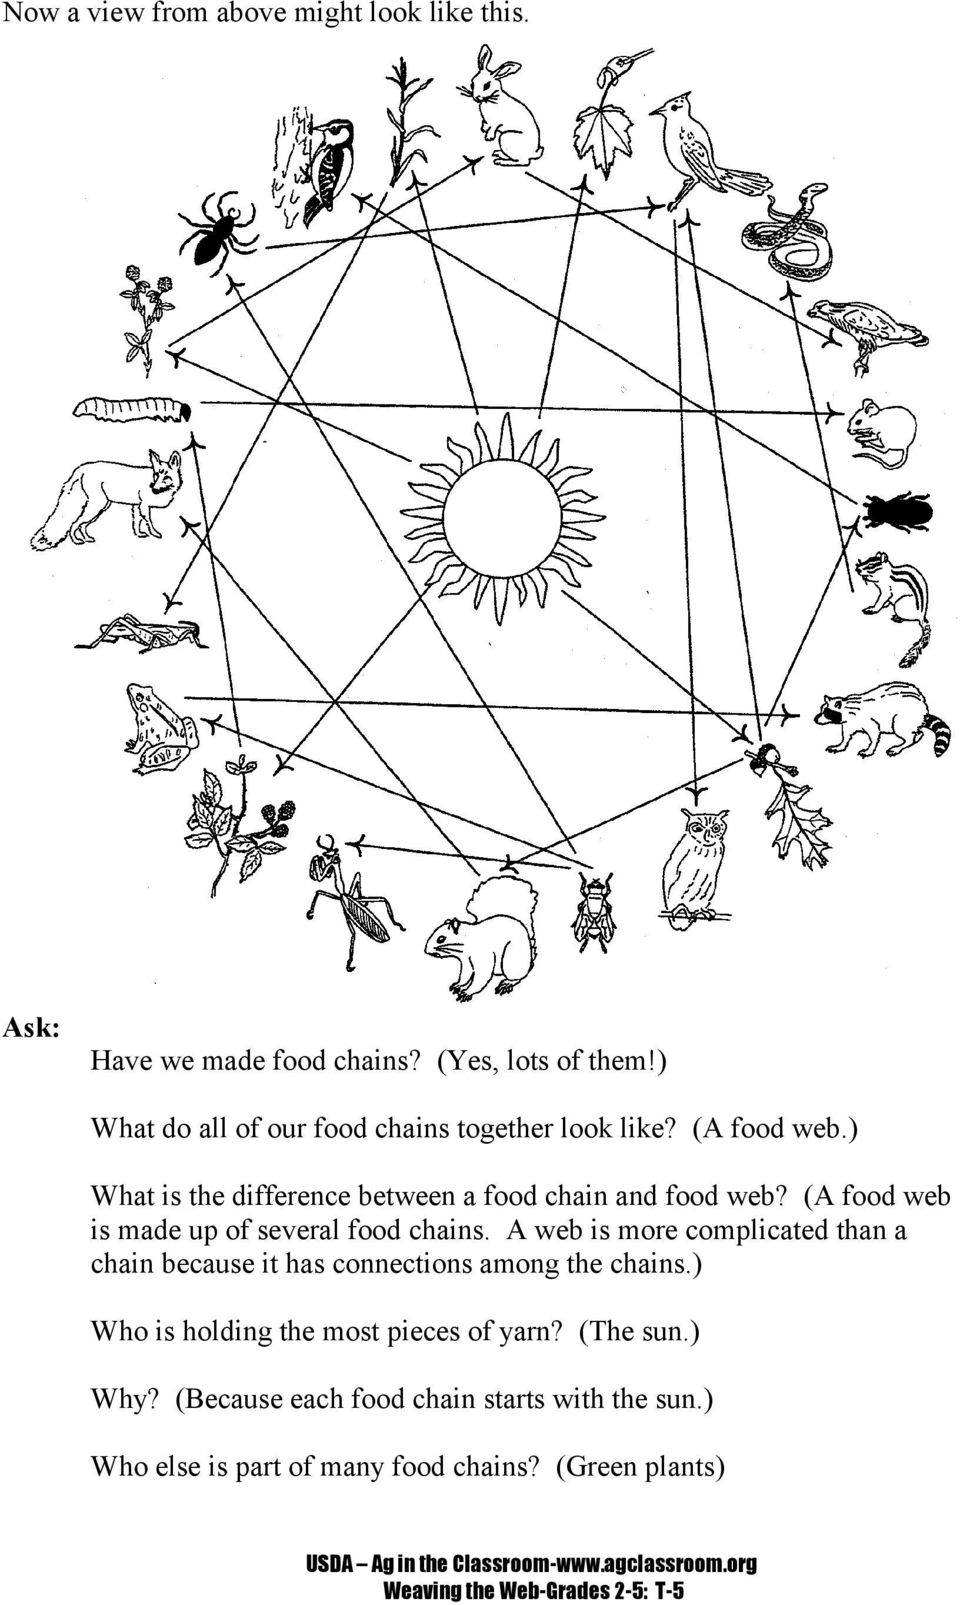 (A food web is made up of several food chains. A web is more complicated than a chain because it has connections among the chains.